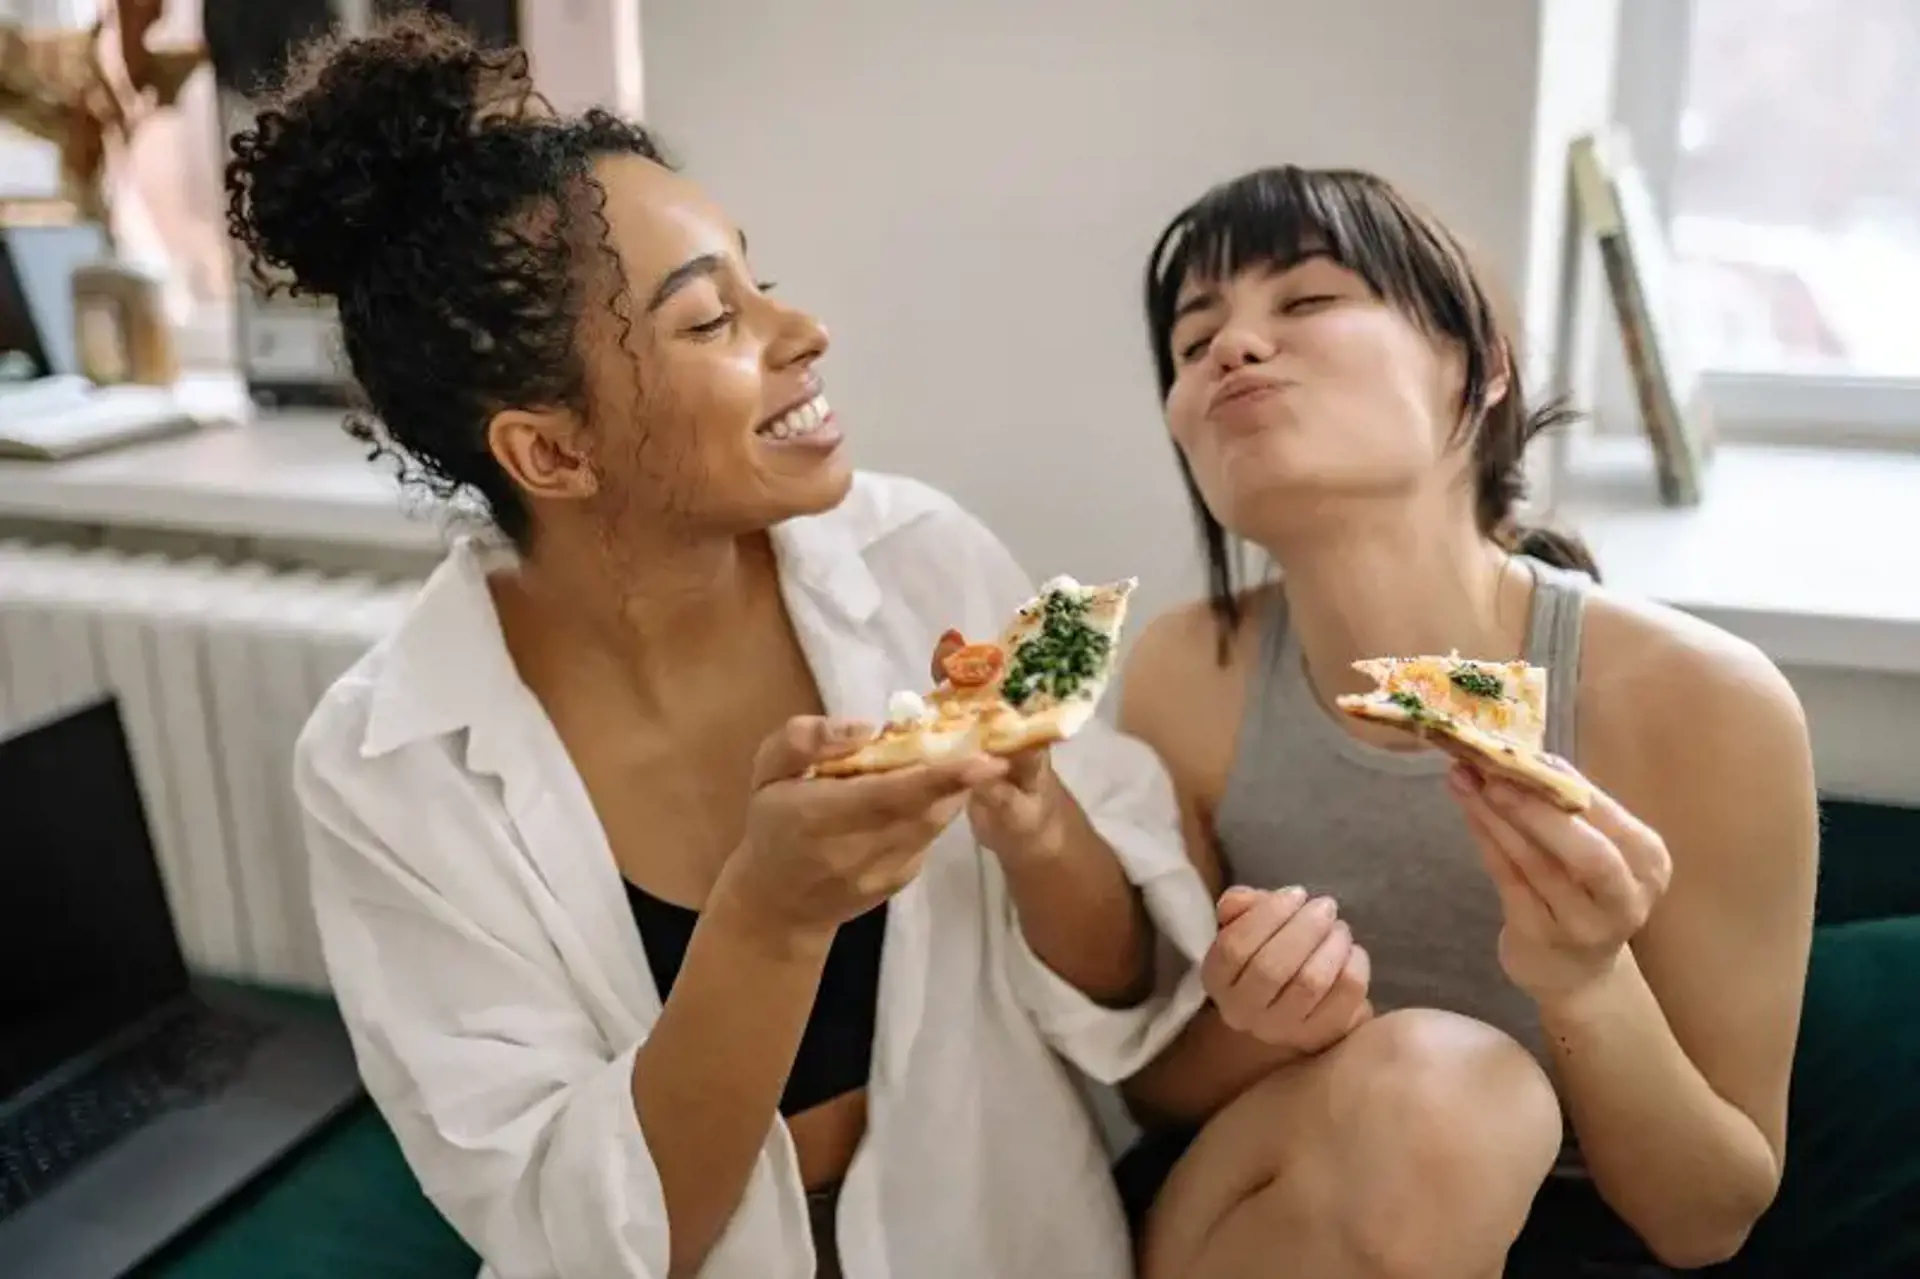 Girls Eating Pizza With Temporary Crown